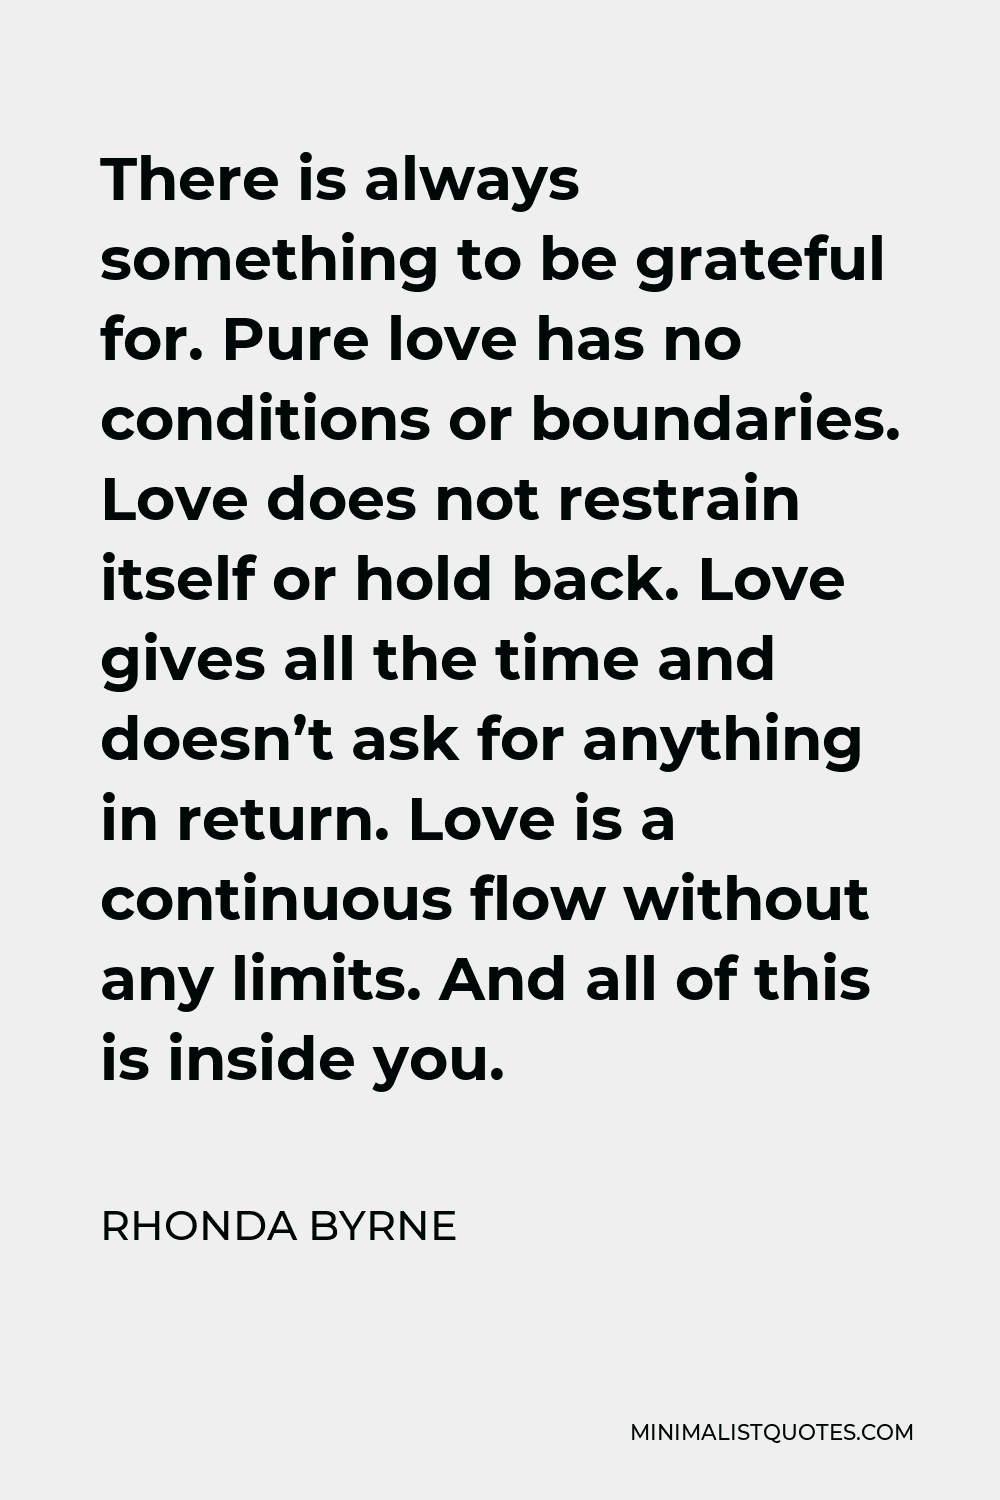 Rhonda Byrne Quote - There is always something to be grateful for. Pure love has no conditions or boundaries. Love does not restrain itself or hold back. Love gives all the time and doesn’t ask for anything in return. Love is a continuous flow without any limits. And all of this is inside you.